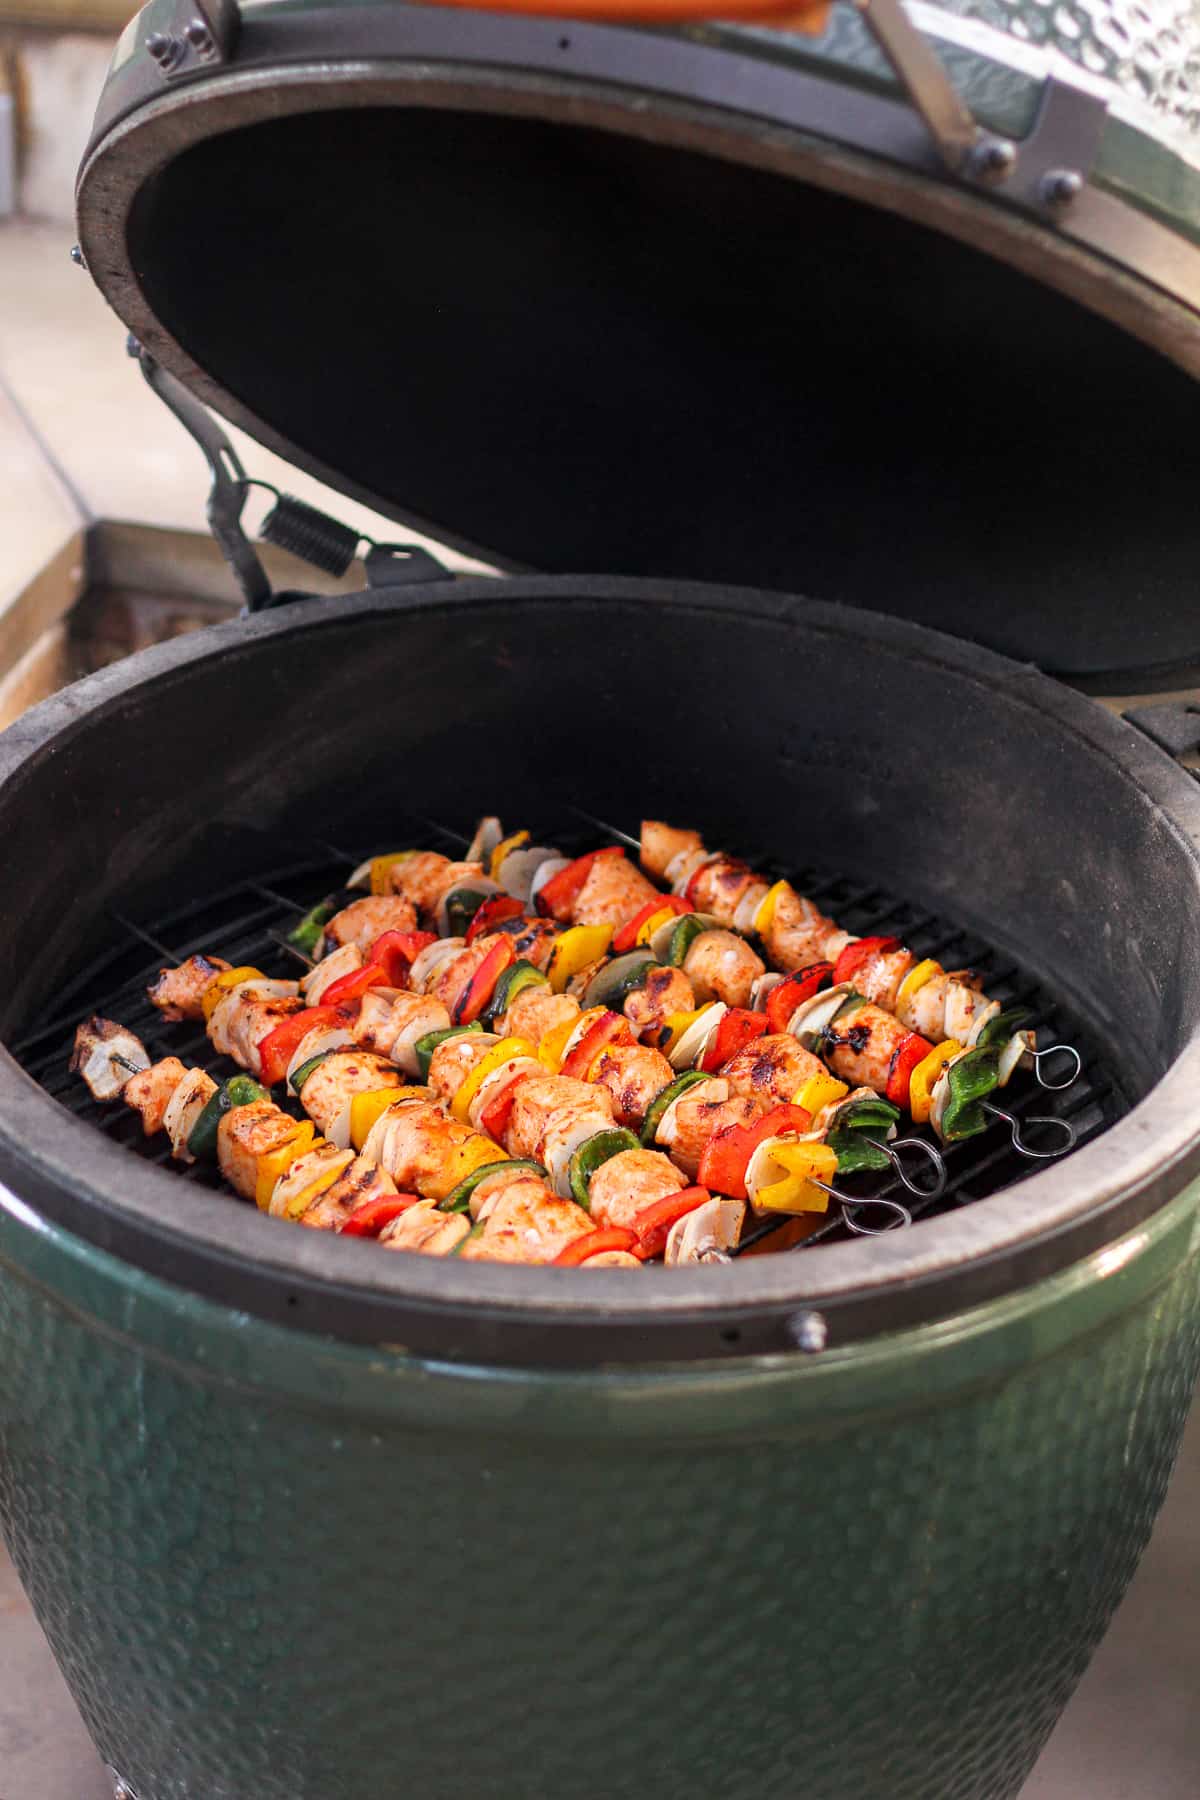 A shot of the Big Green Egg with the kabobs on the grill.